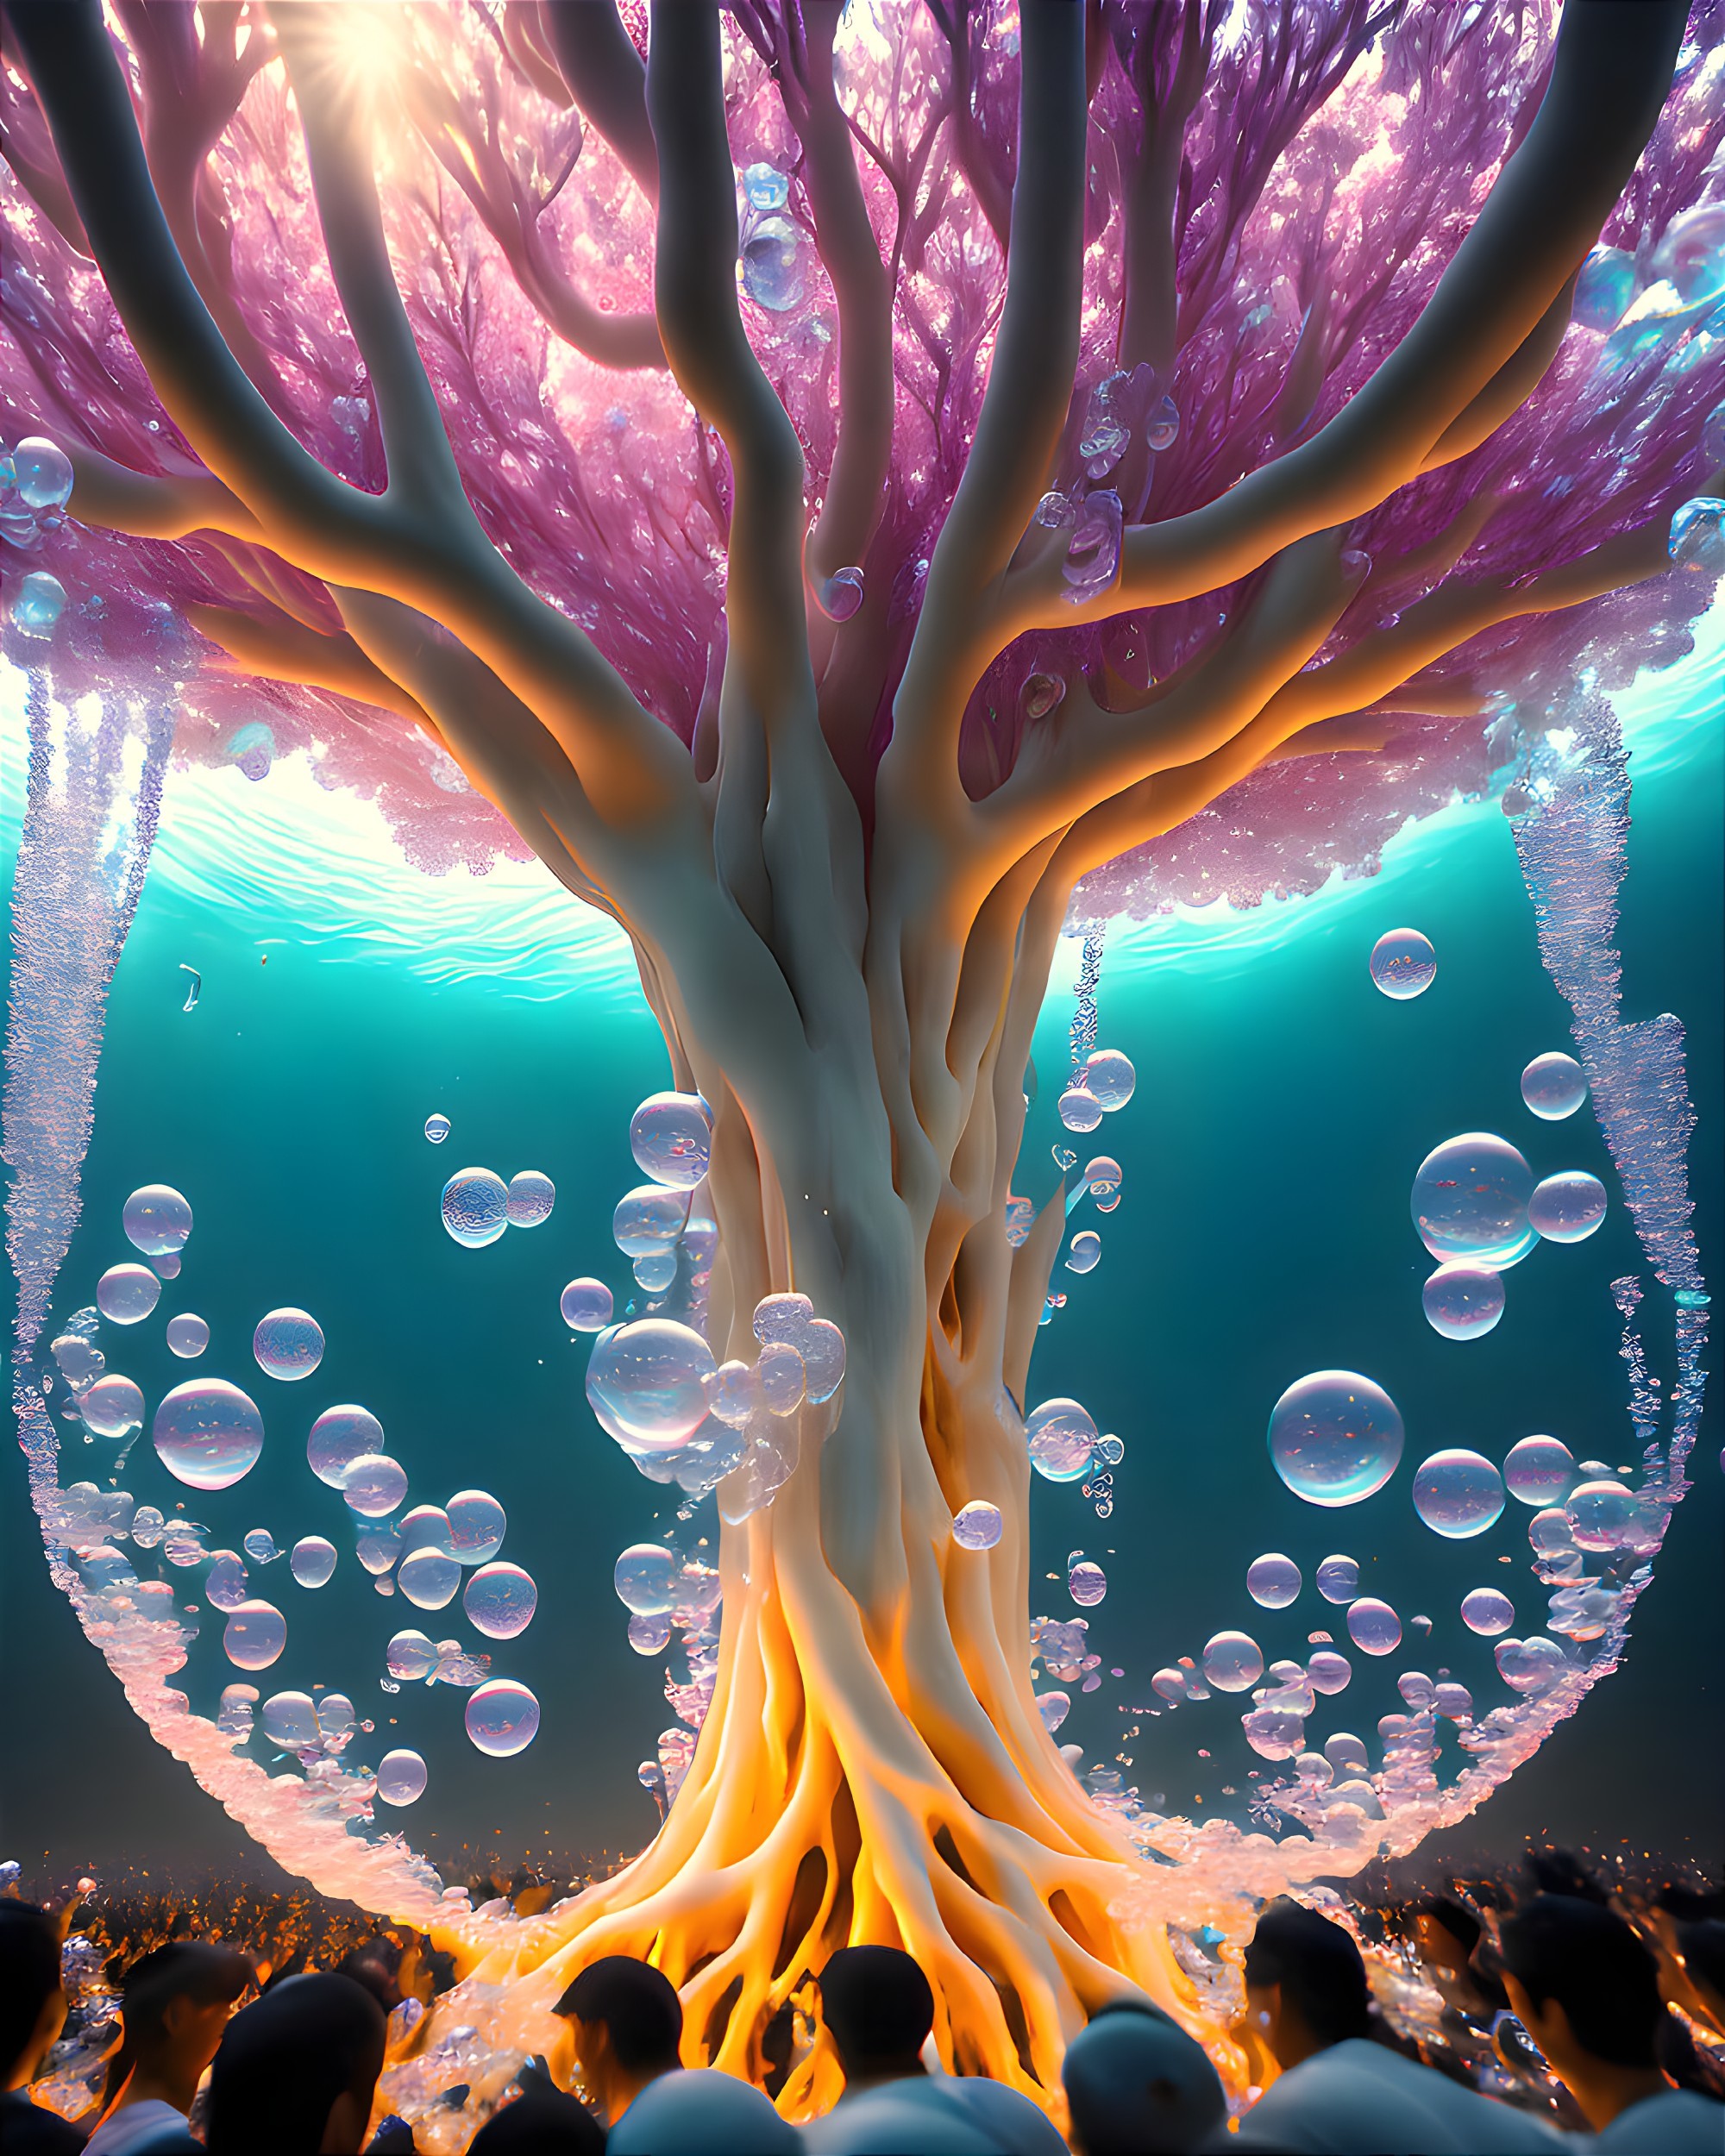 Ascension of human souls at the Tree of Life